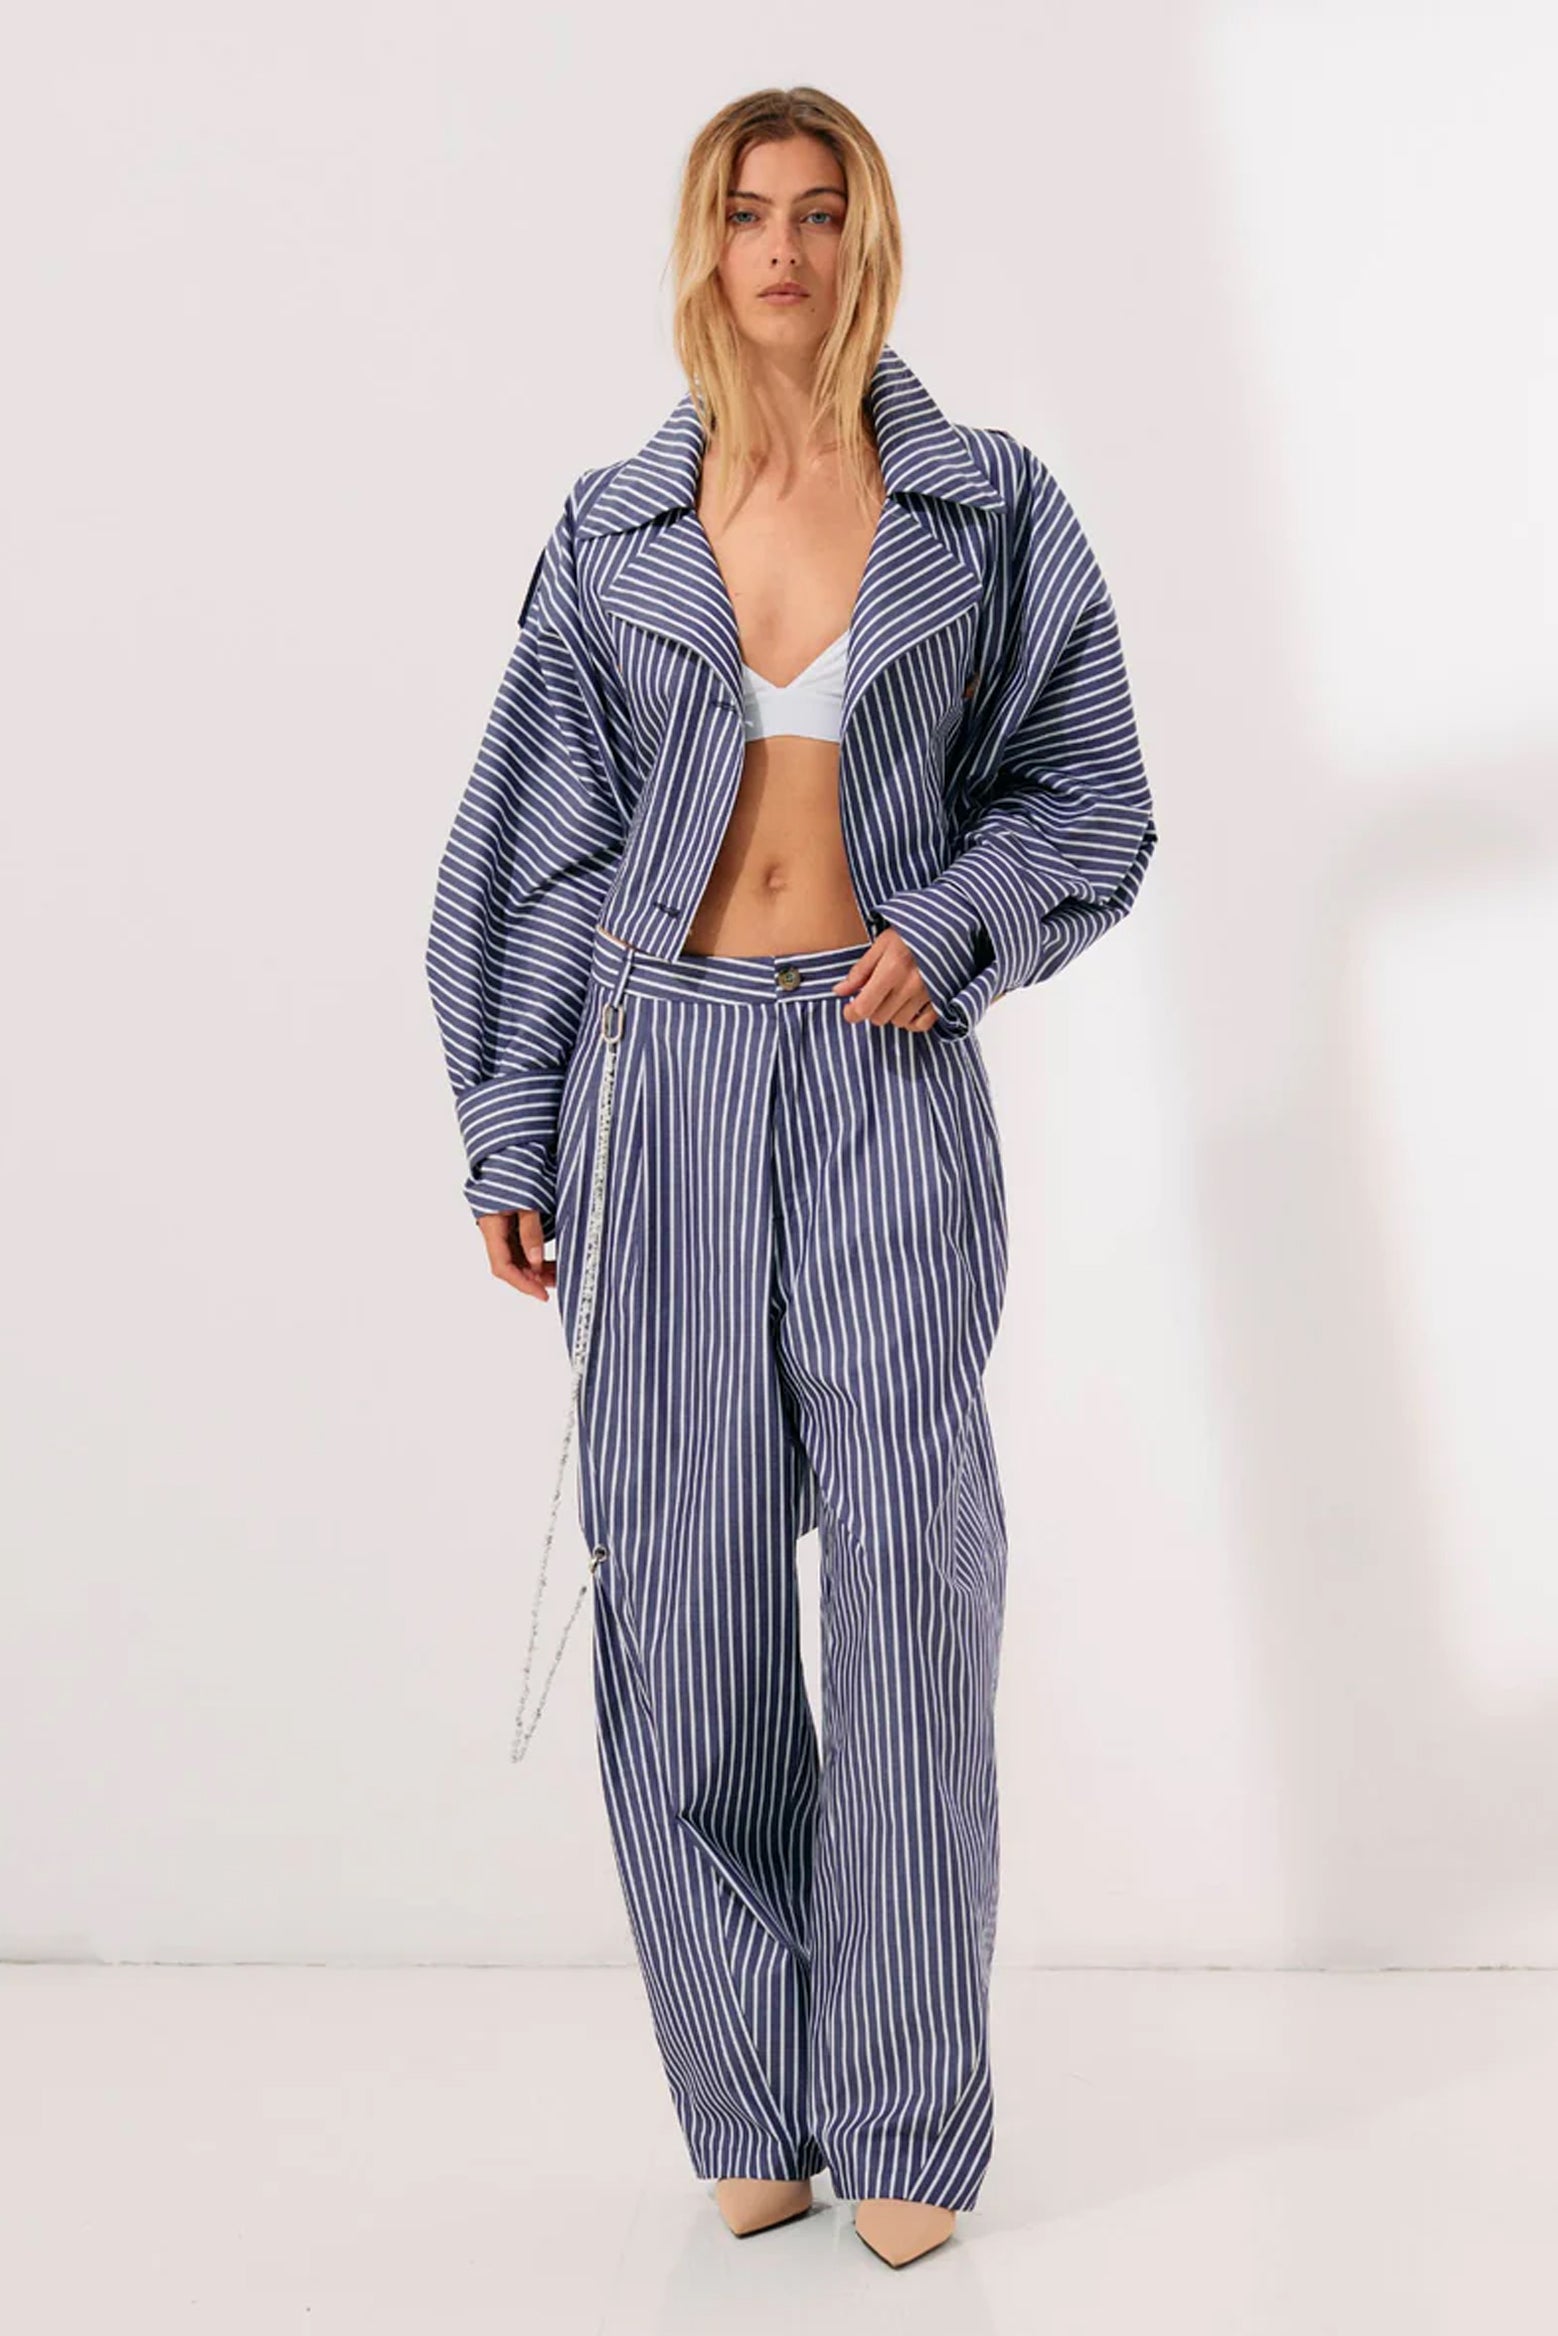 Darkpark Phebe Wide Leg Pants in Raw Blue/White available at The New Trend Australia. 